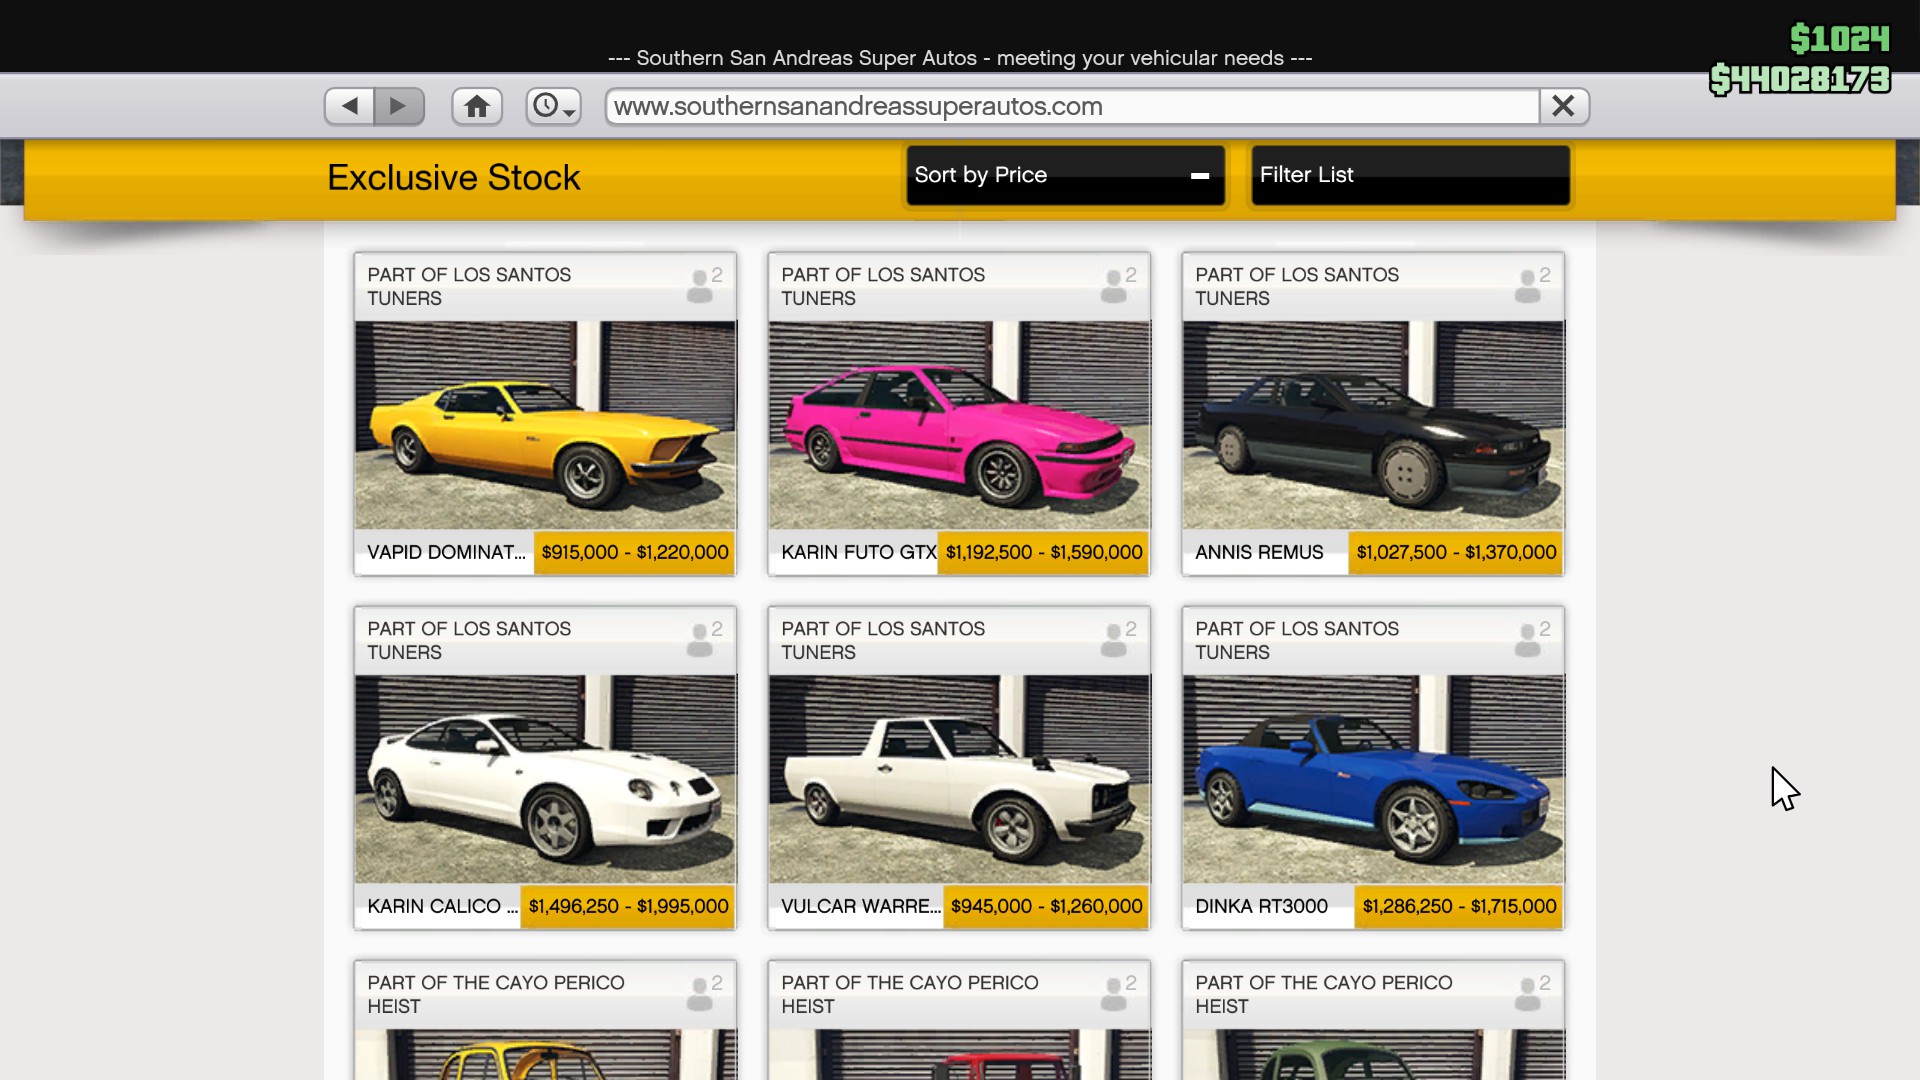 Los Santos Tuners DLC: Release Date, New Car Reviews, How To Get